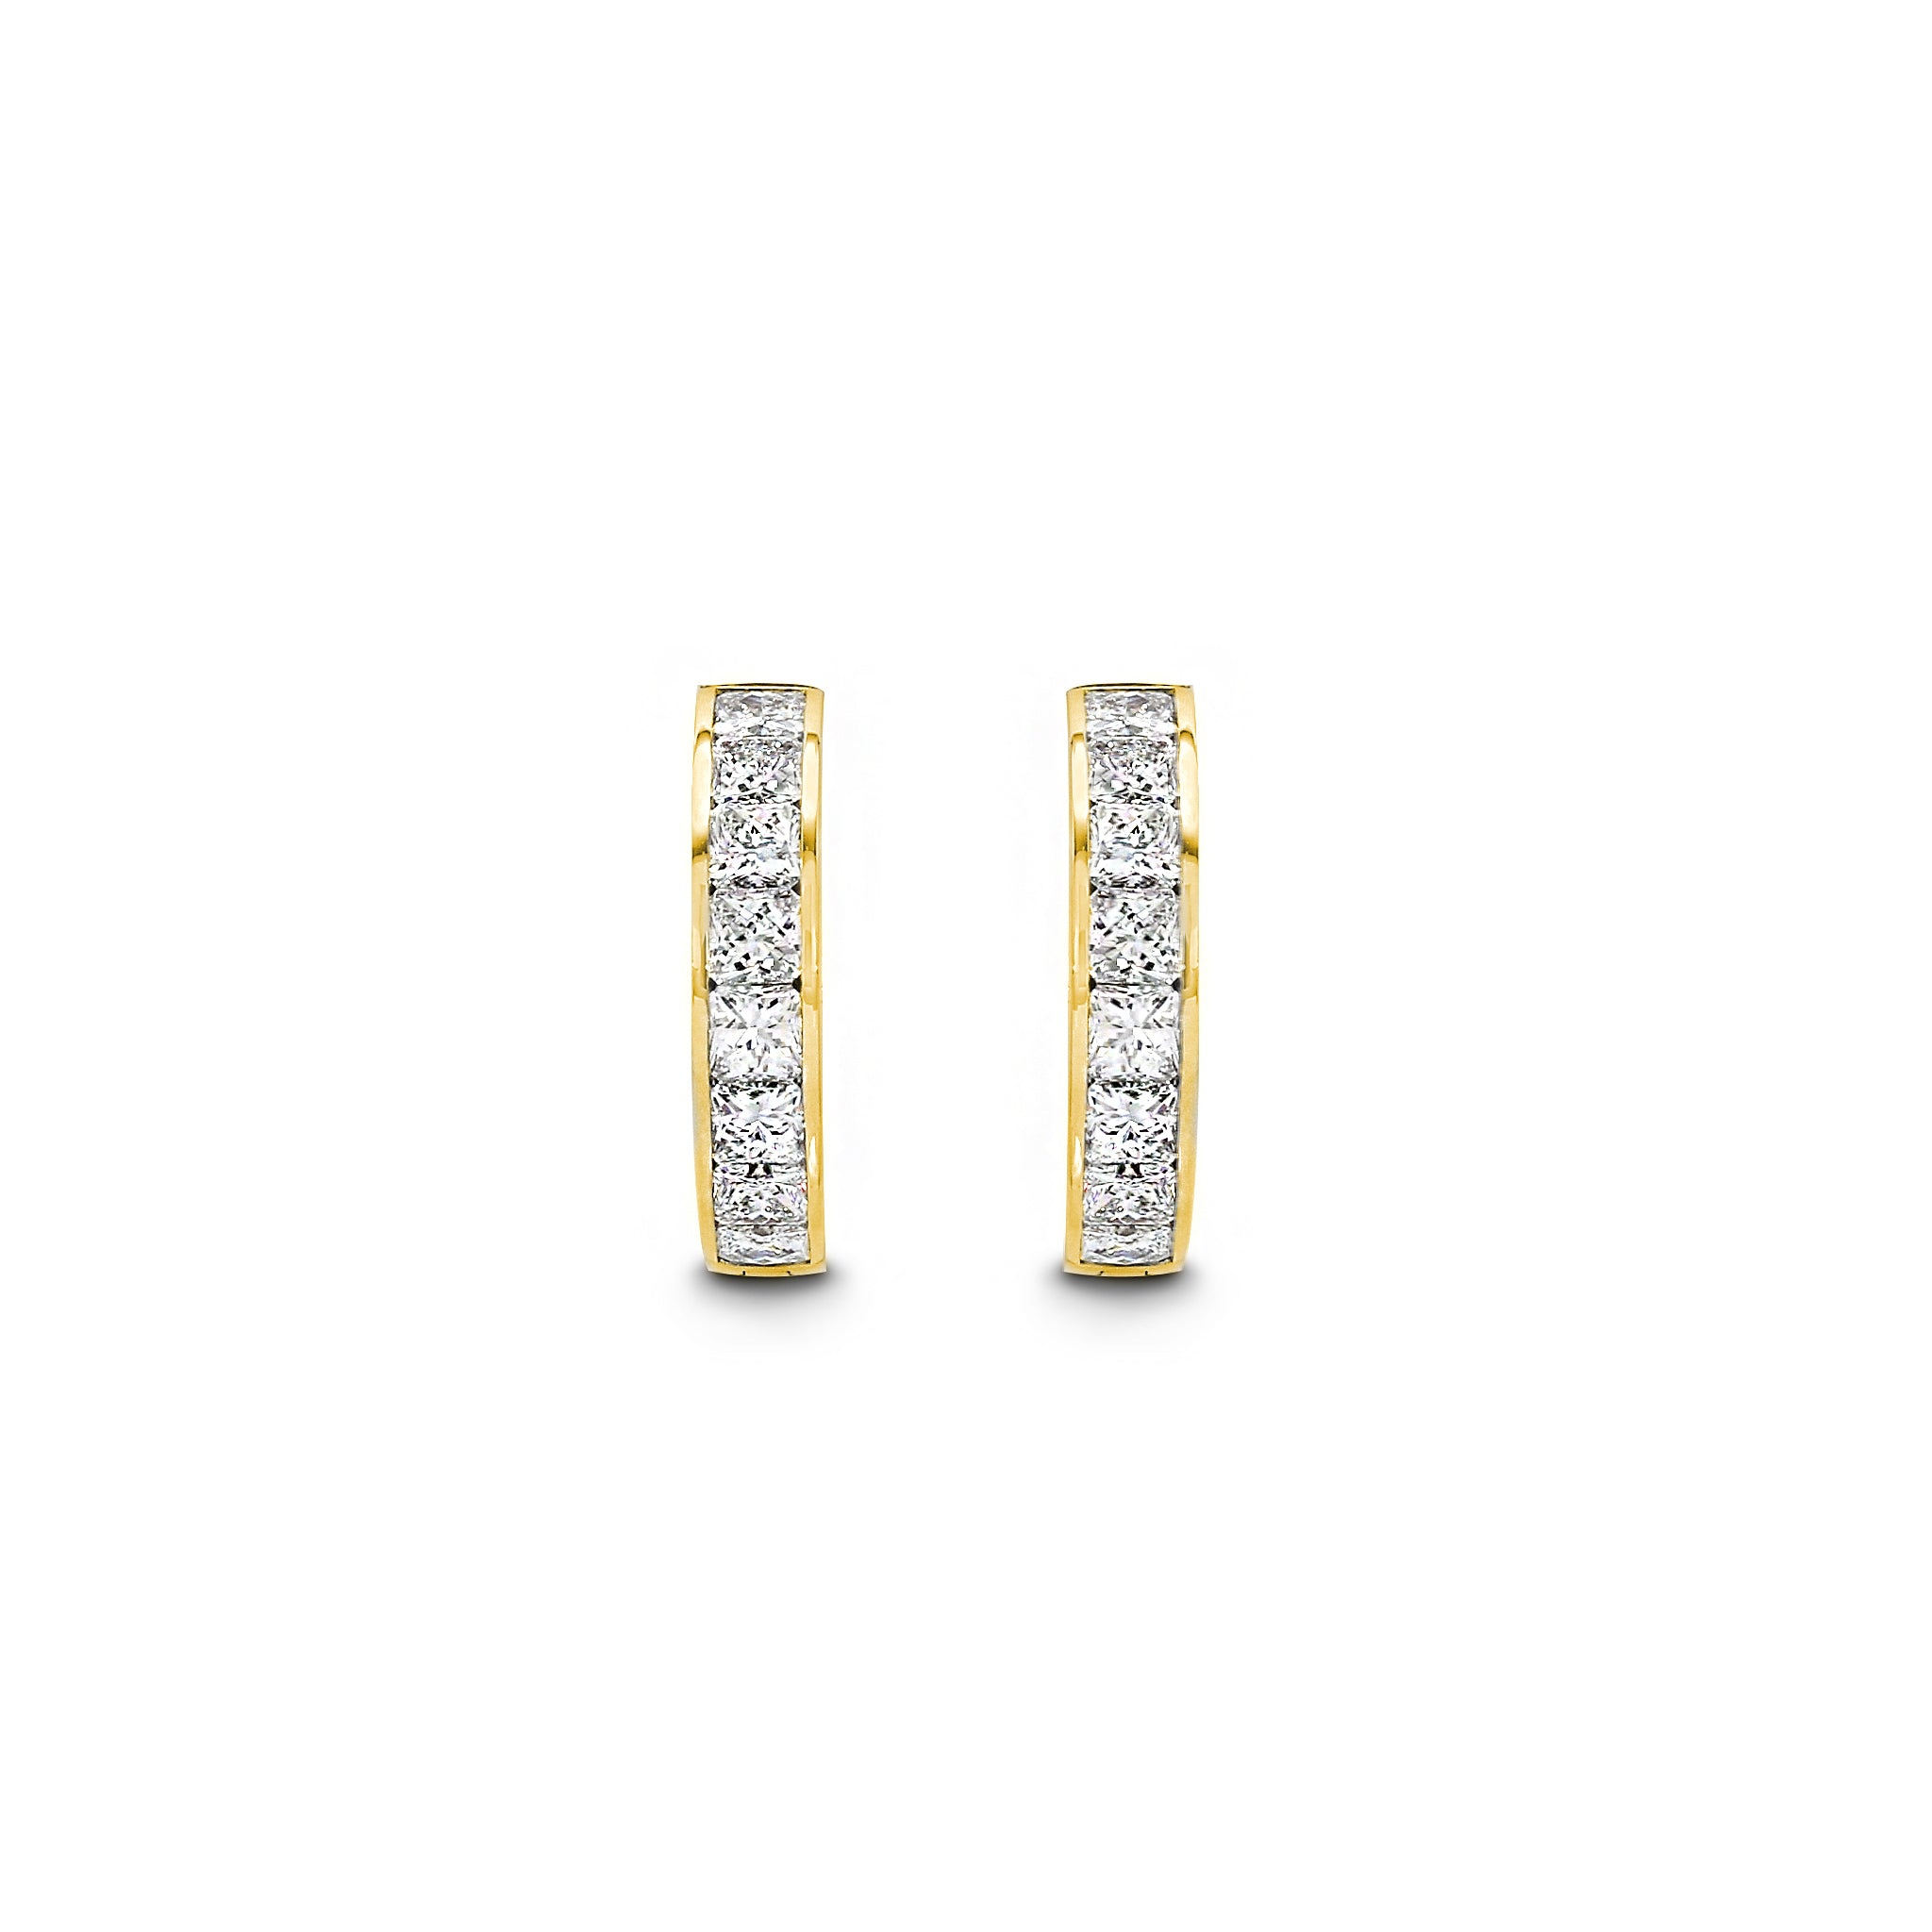 Shimansky - My Girl Channel Set Diamond Huggie Earrings 2.00ct Crafted in 18K Yellow Gold